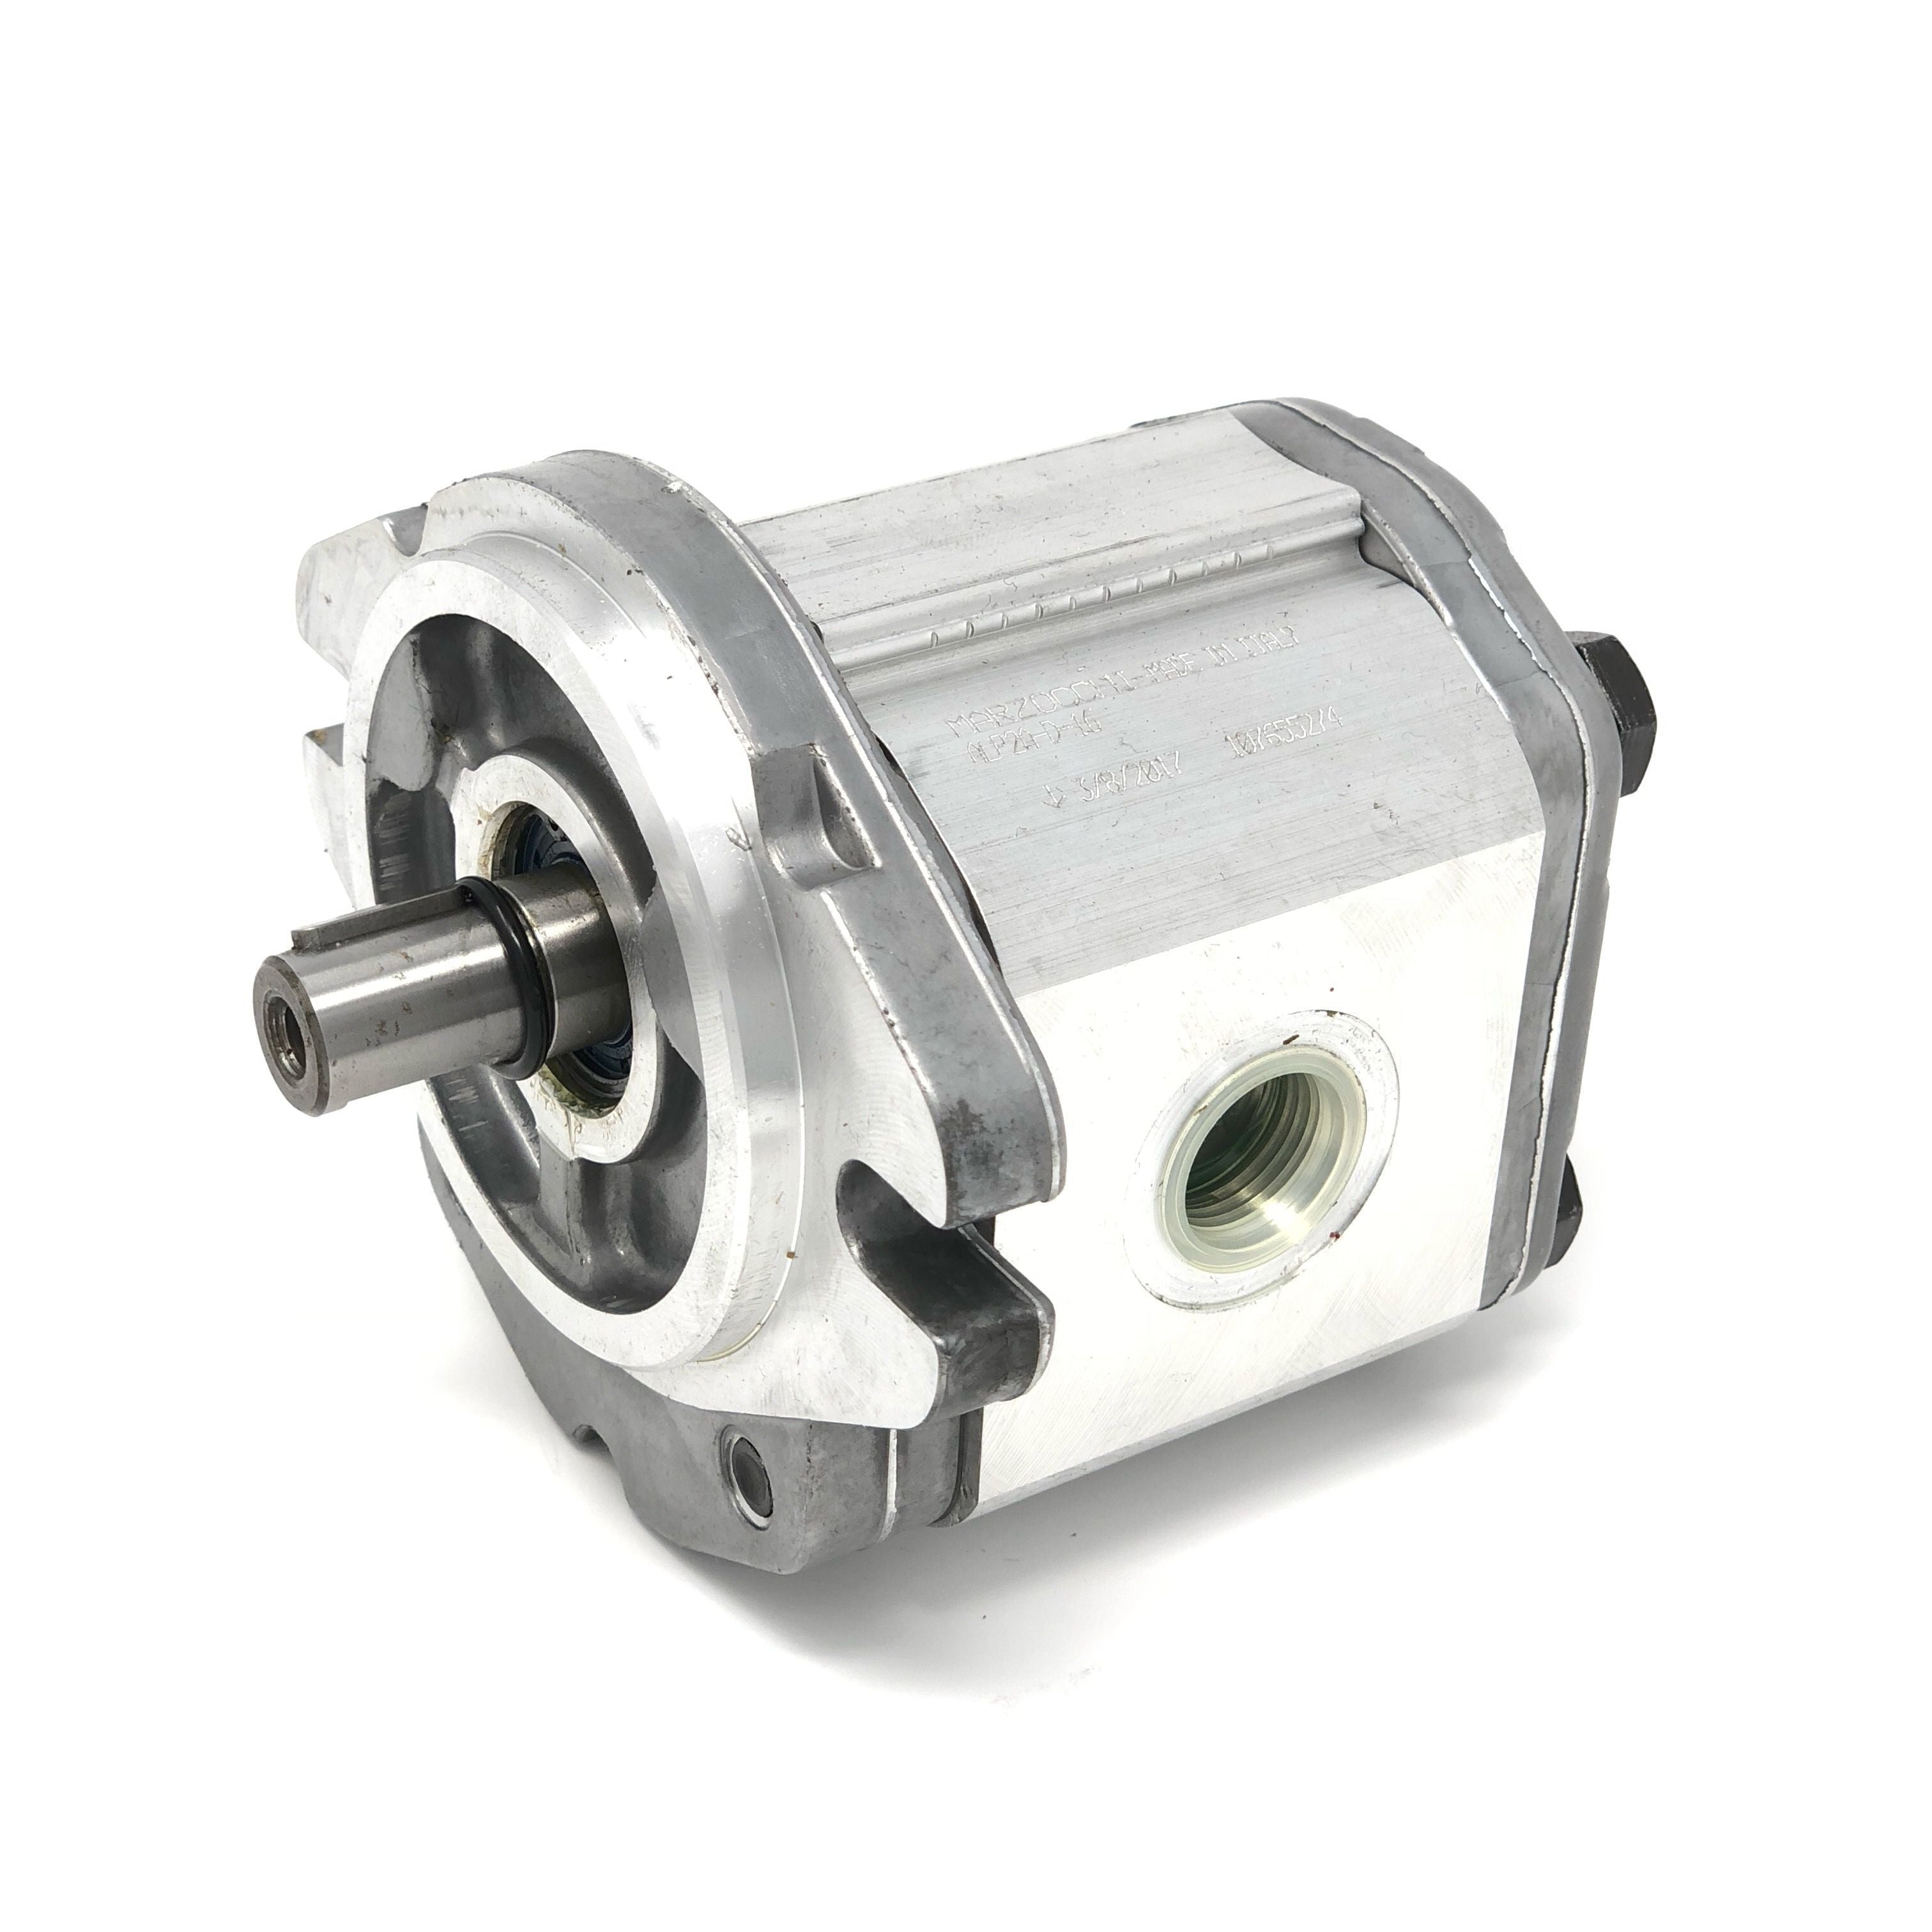 ALP2A-D-34 : Marzocchi Gear Pump, CW, 23.7cc (1.4457in3), 11.27 GPM, 2610psi, 2000 RPM, #12 SAE (3/4") In, #10 SAE (5/8") Out, Keyed Shaft 5/8" Bore x 5/32" Key, SAE A 2-Bolt Mount